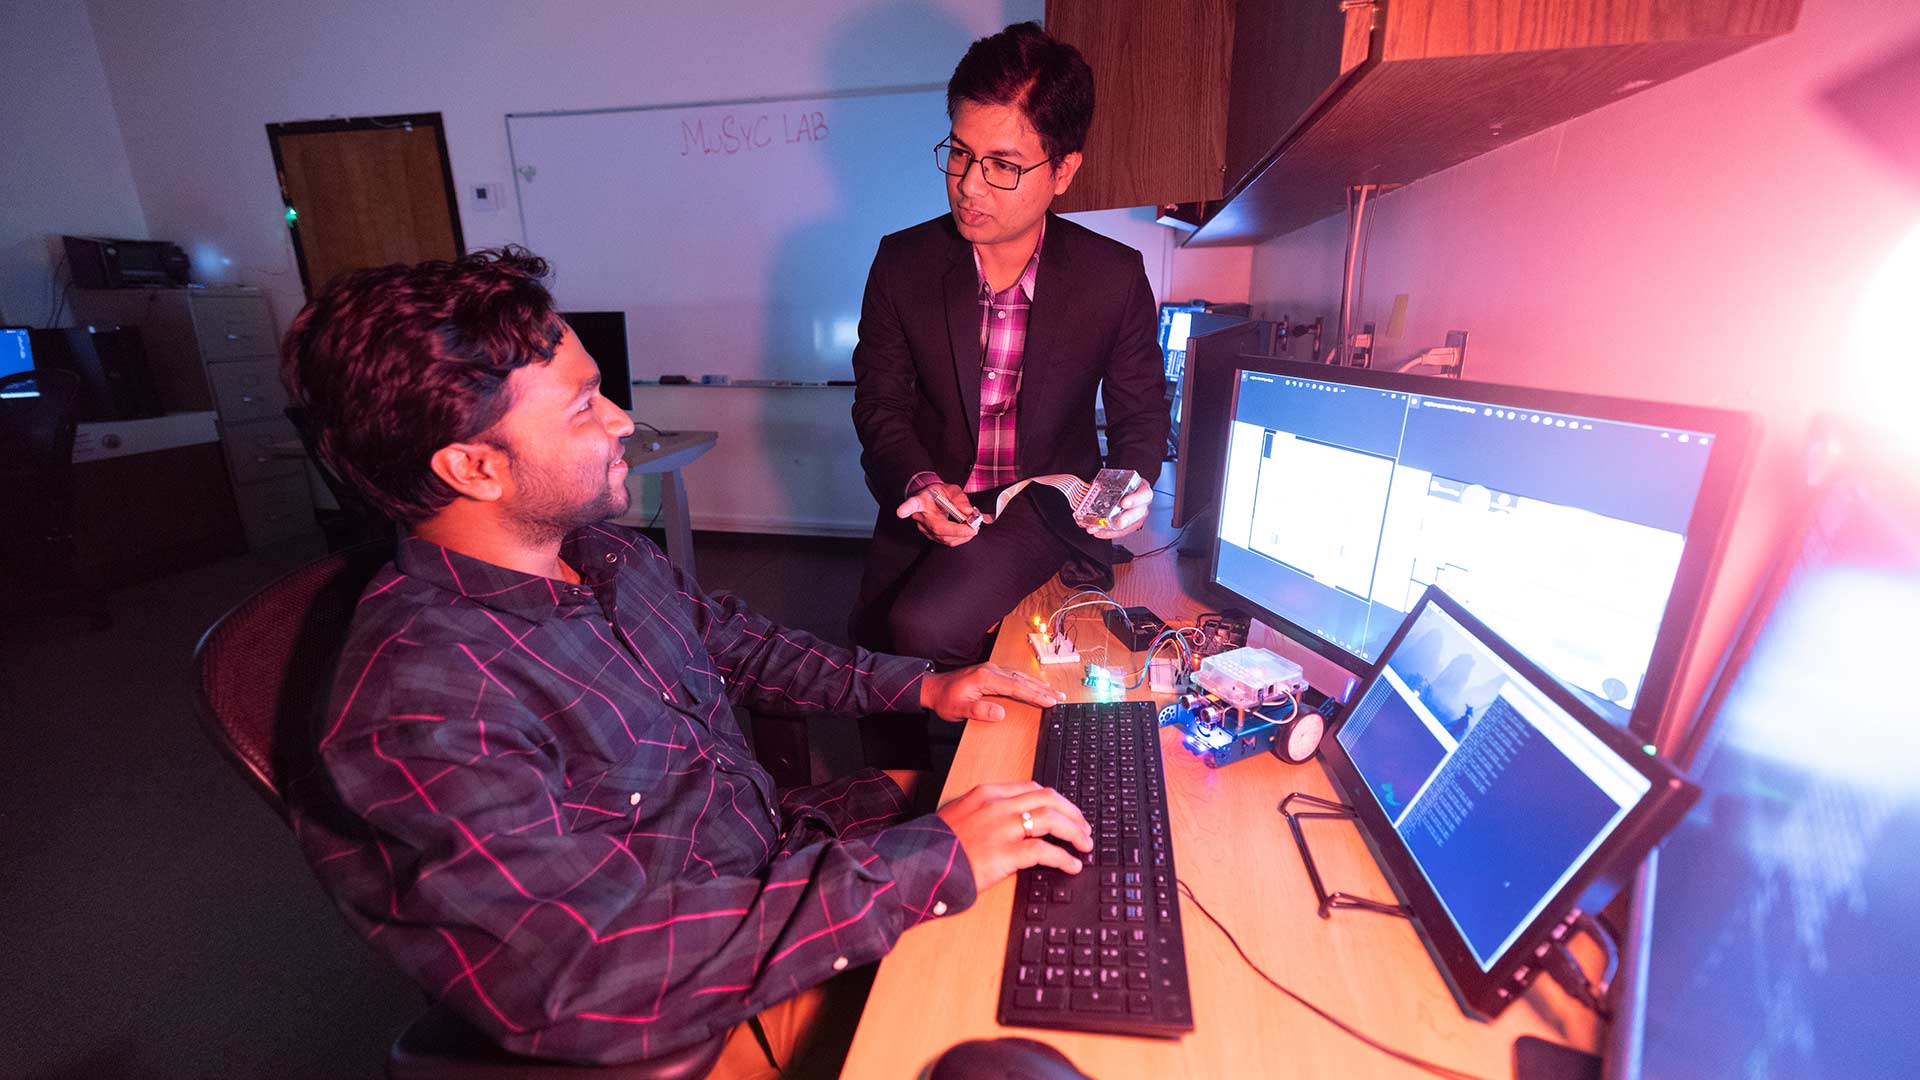 A professor and student conduct a demo on a piece of equipment in a computer science lab.